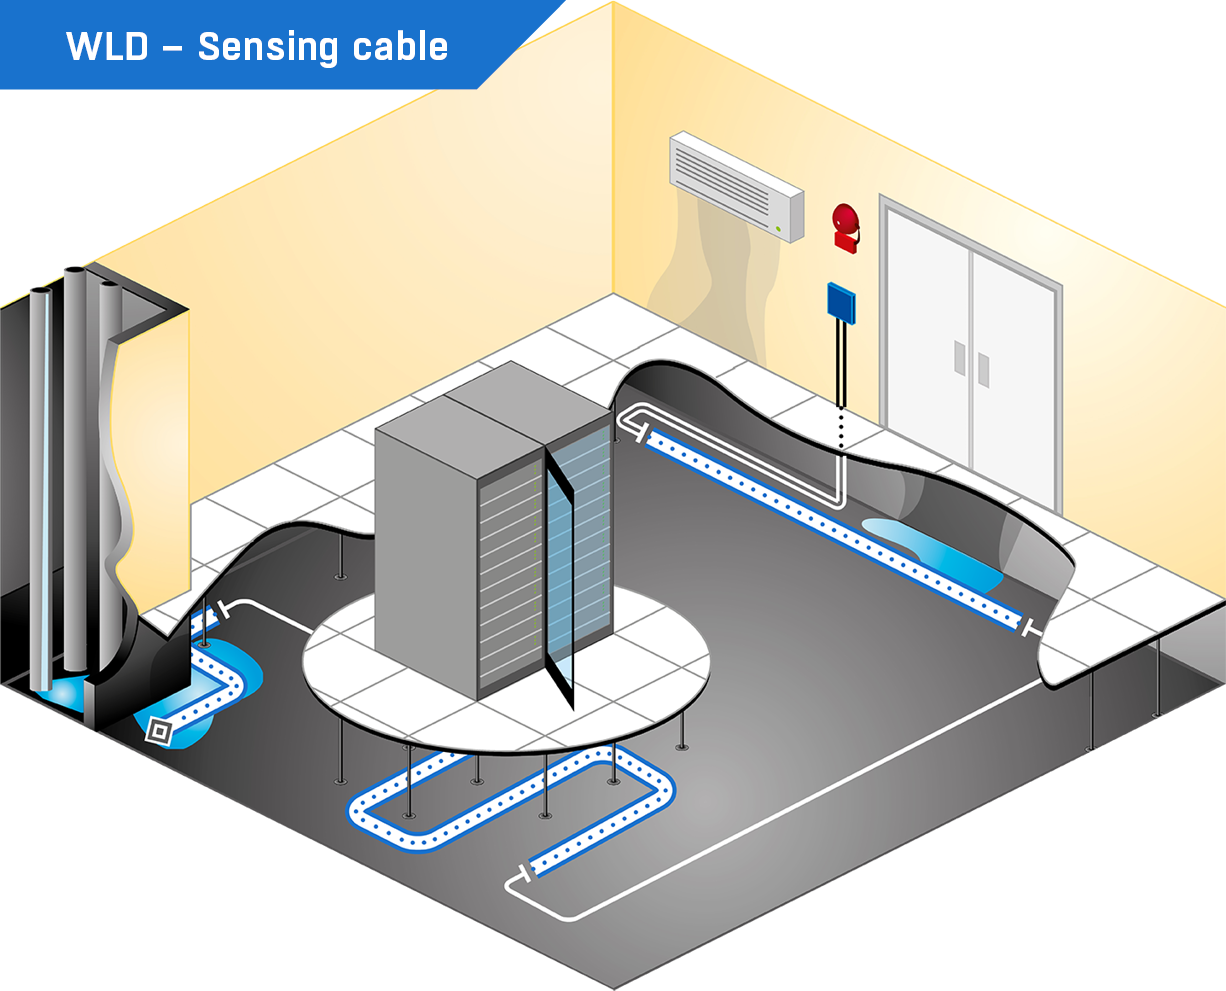 Water Leak Detection with sensing cable is reliable and you get an early alert. You can quickly react and avoid costly damages.